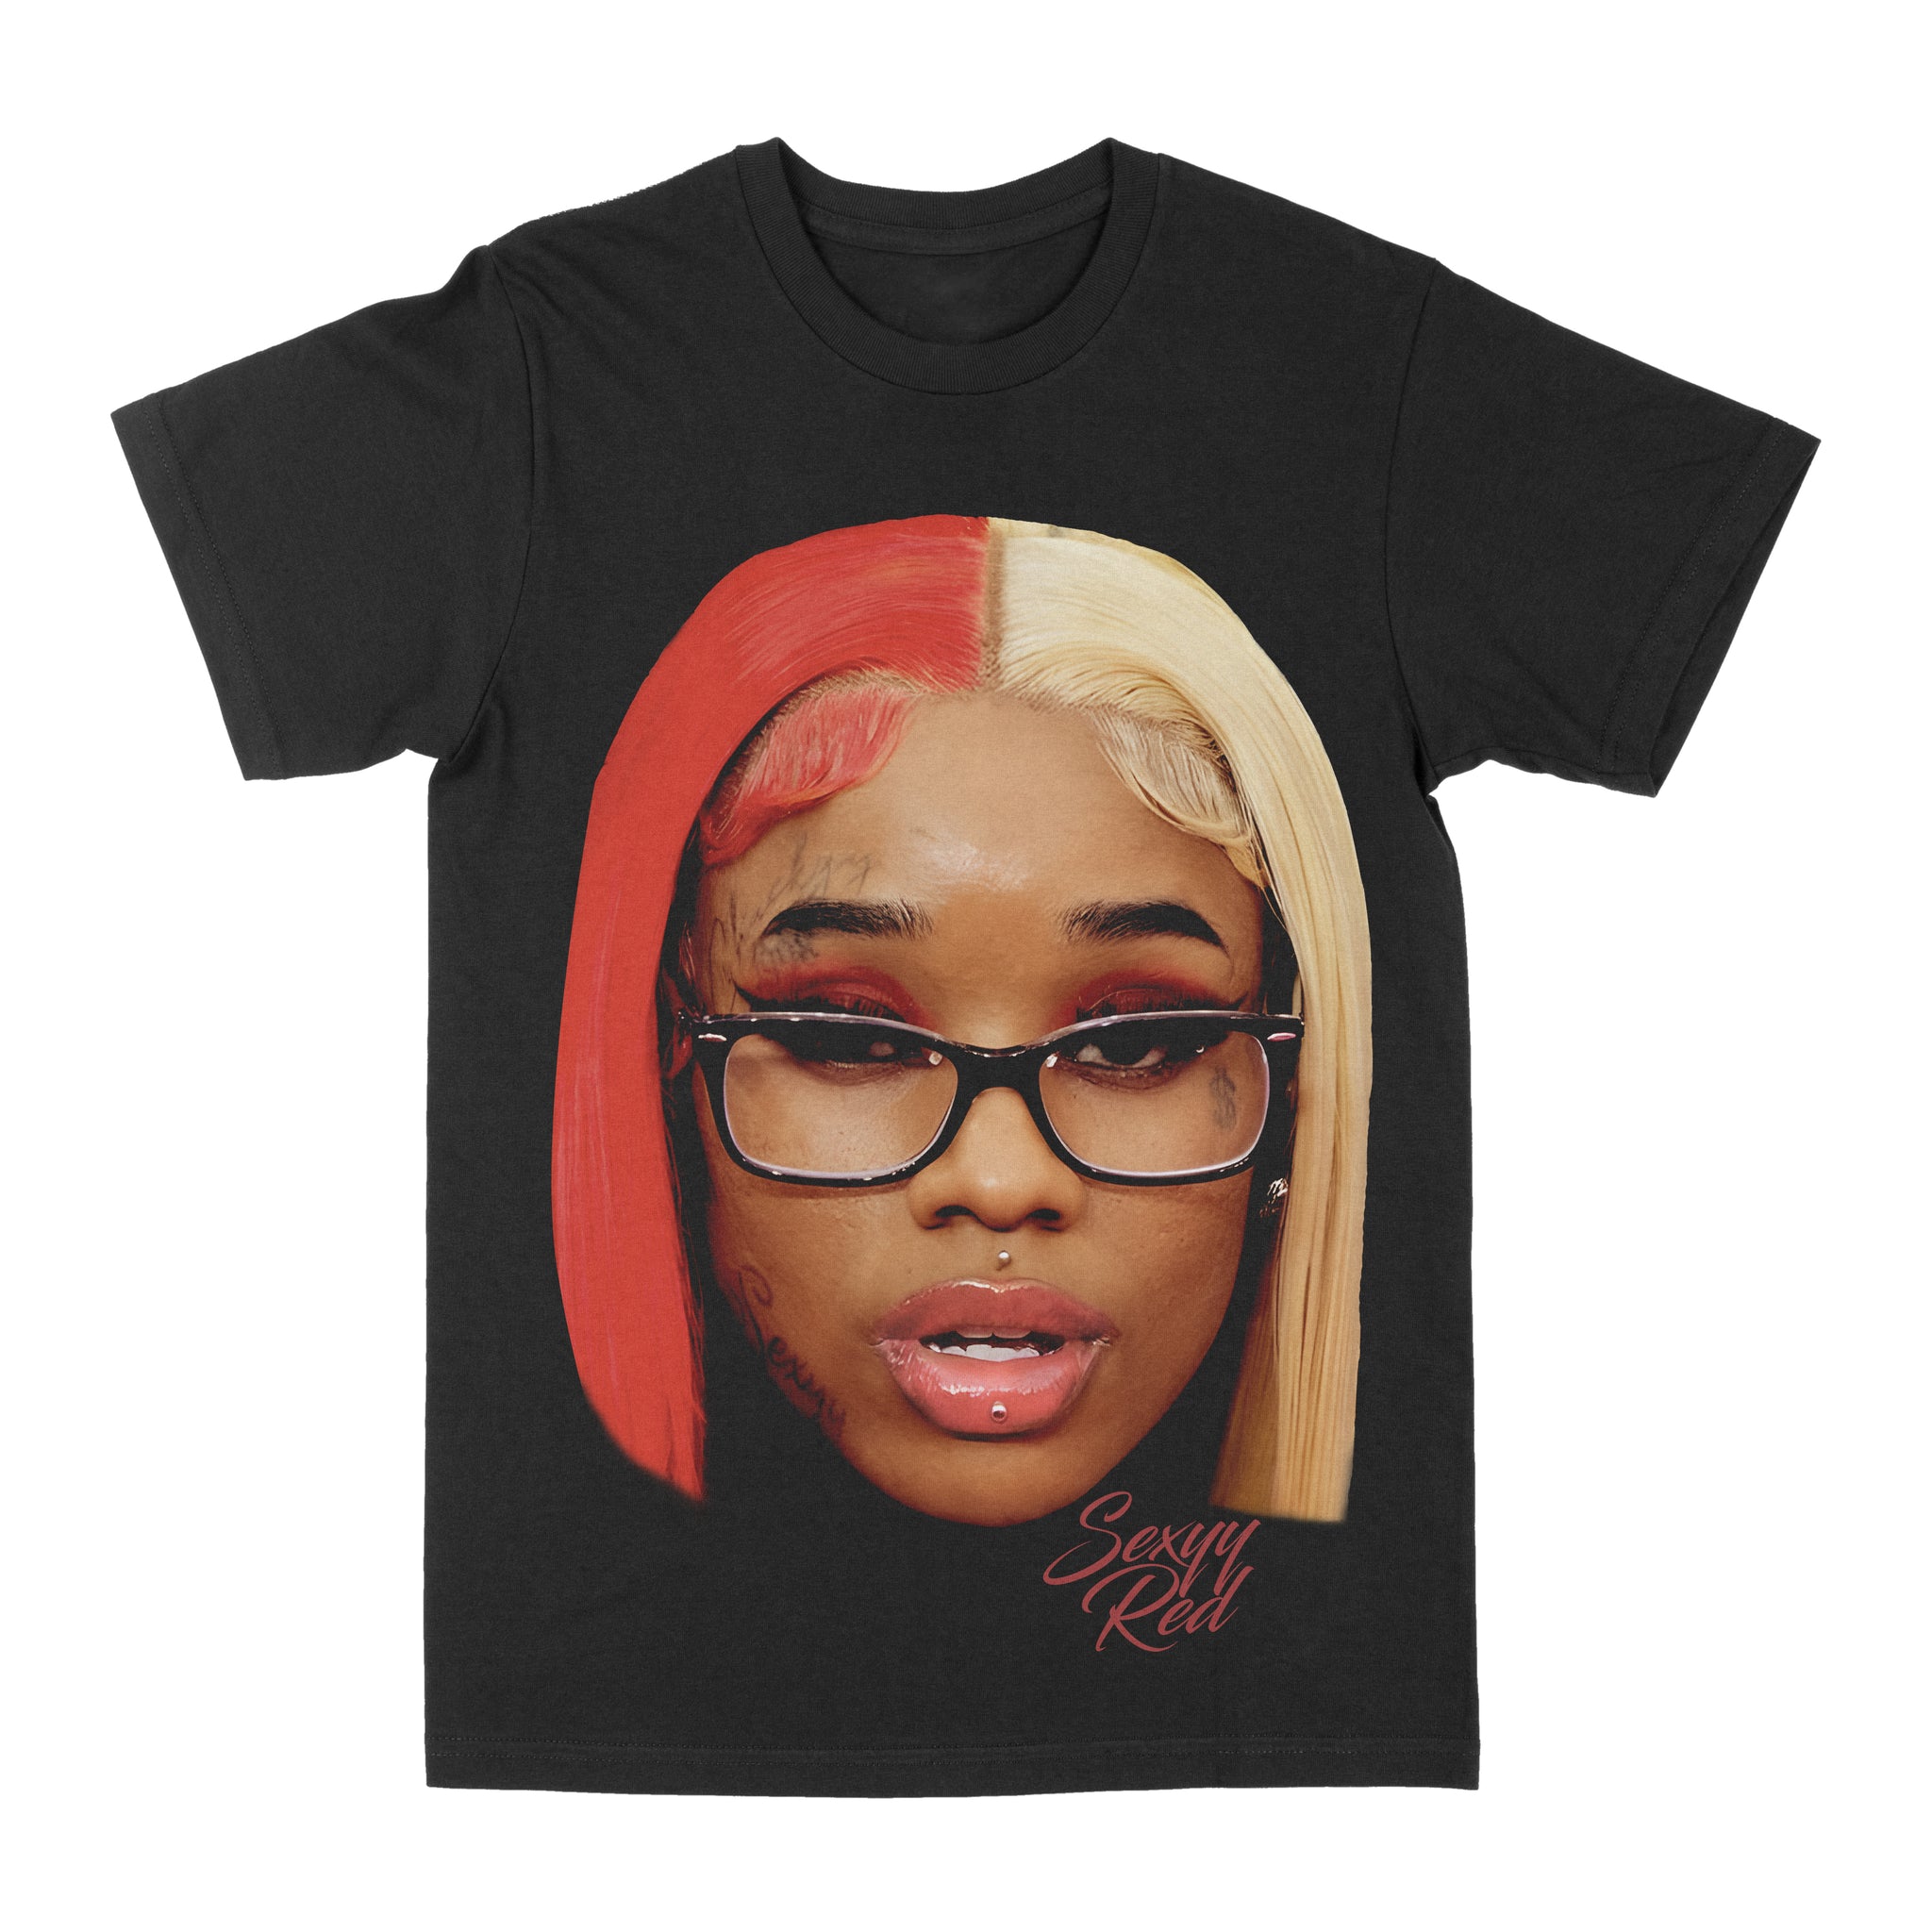 Sexyy Red "Big Face" Graphic Tee